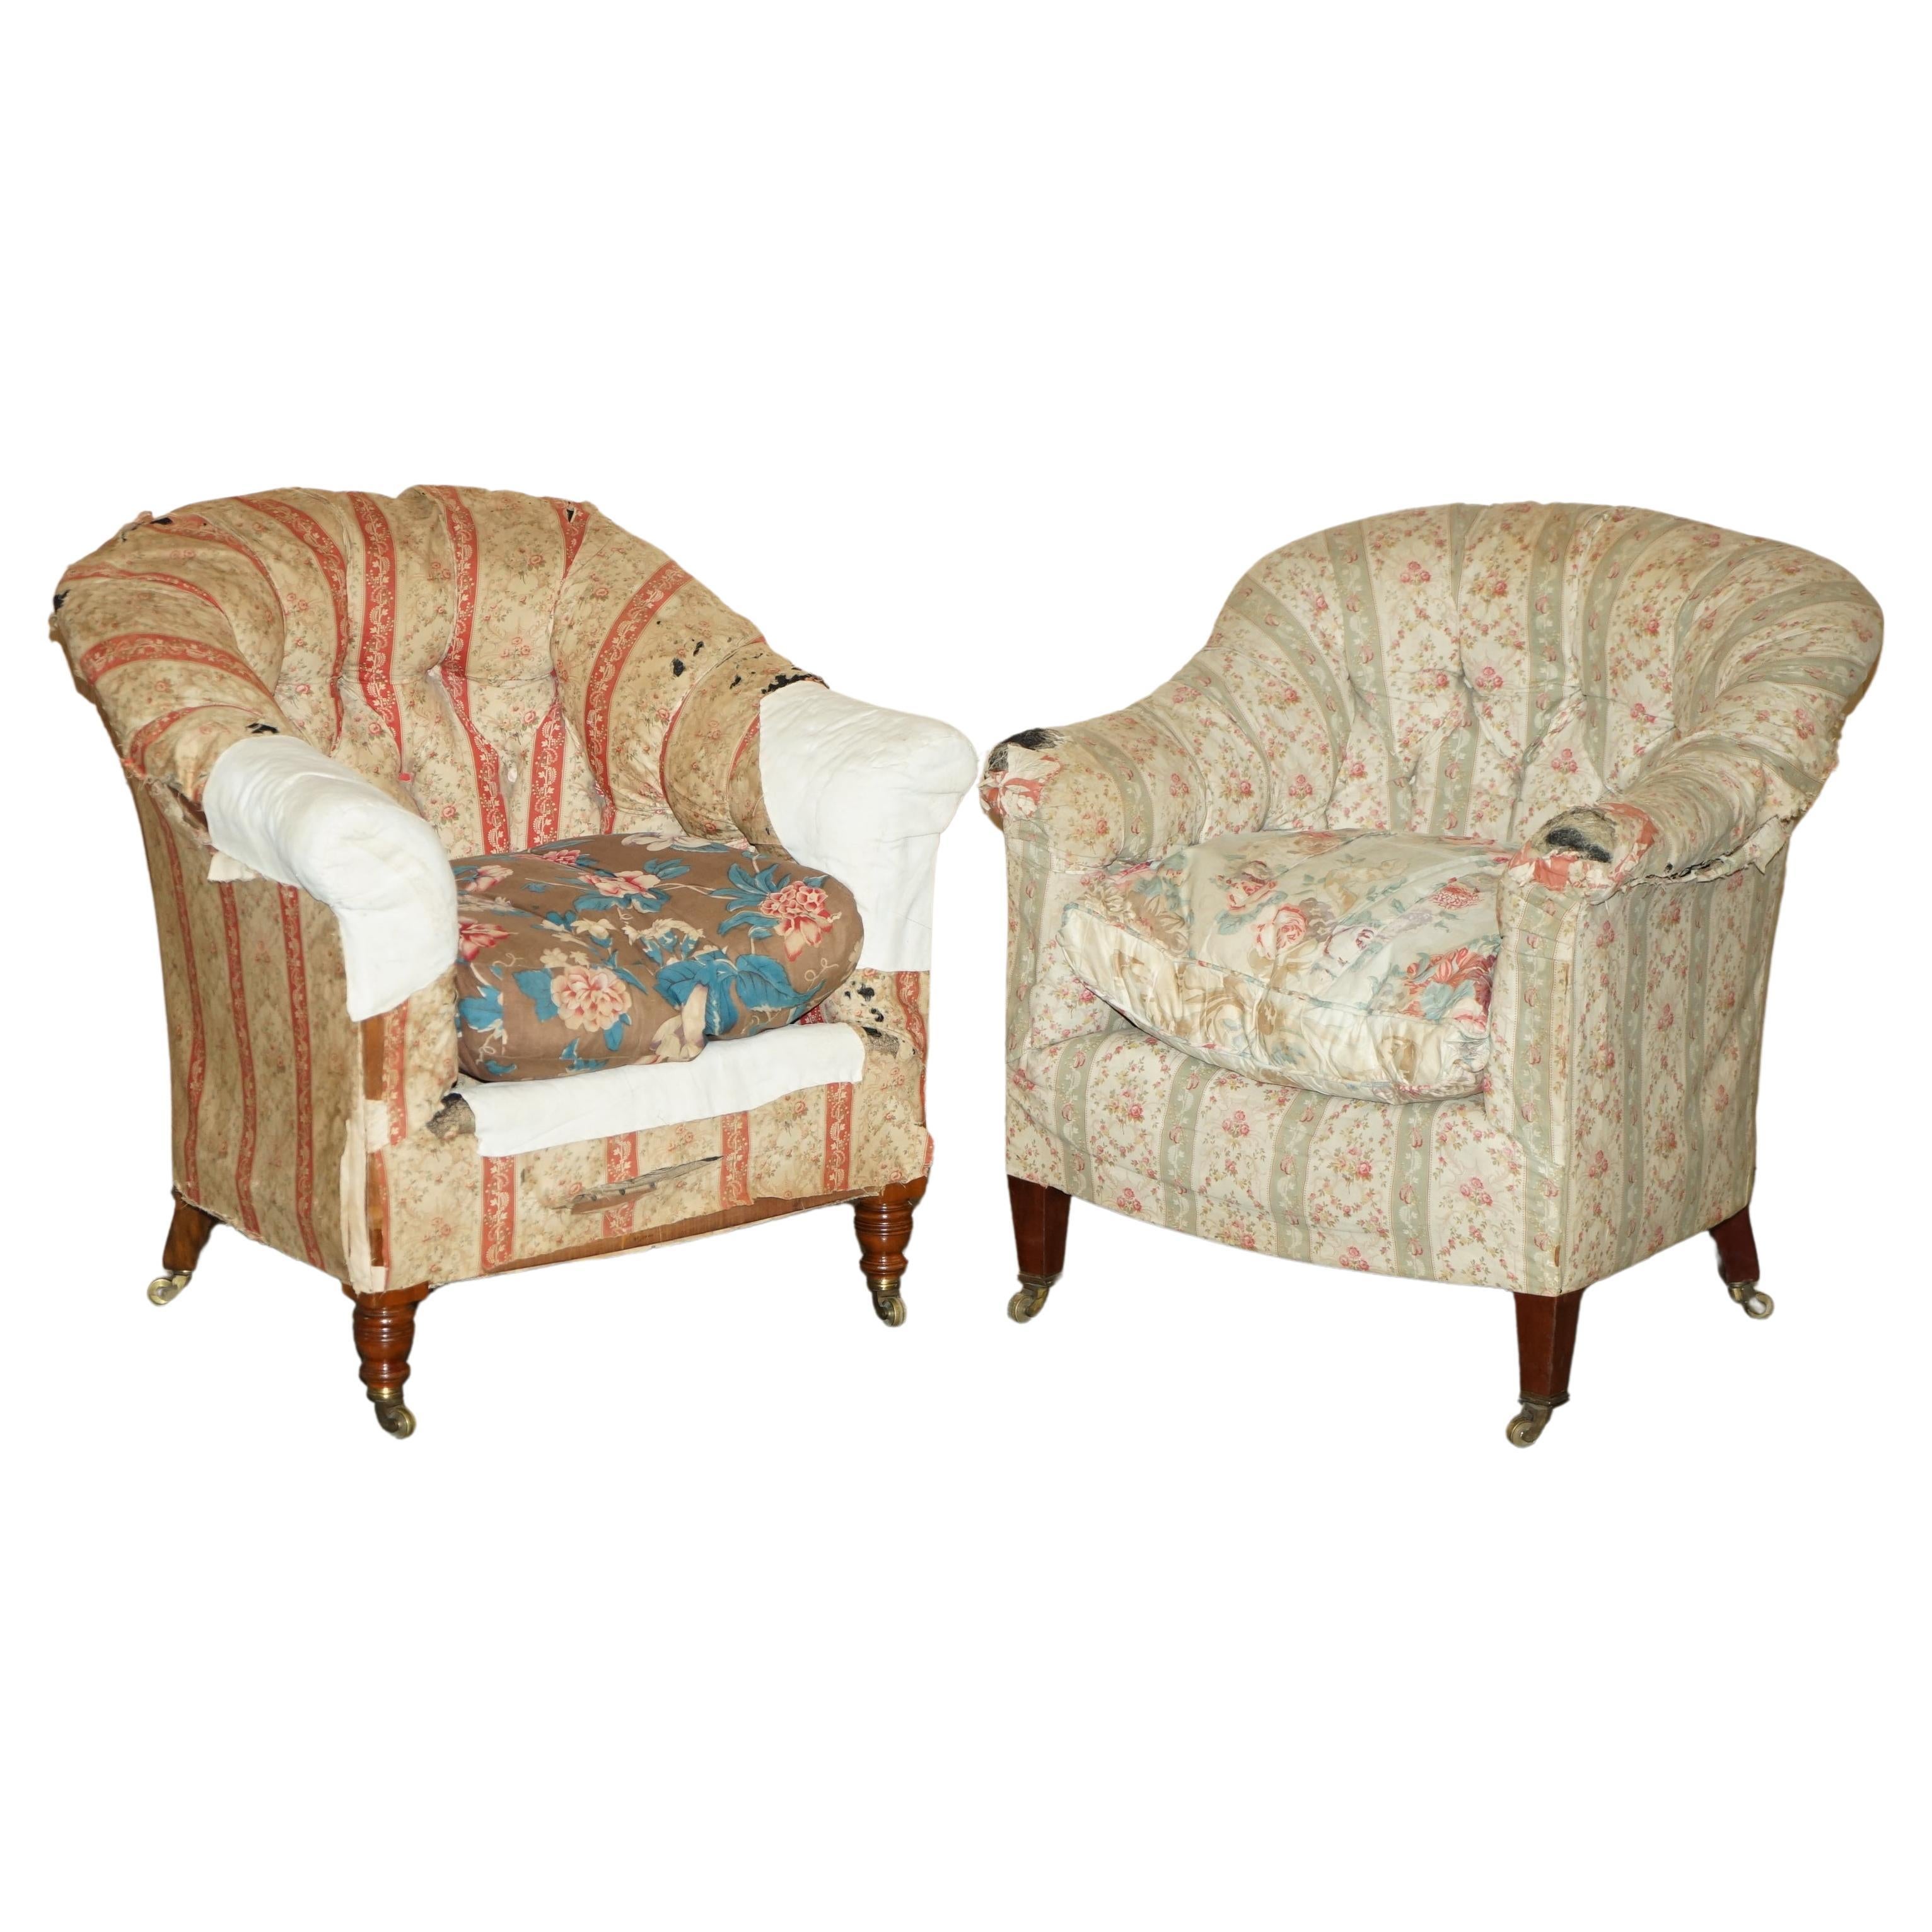 Pair of Antique Original Ticking Fabric Howard & Son's Chesterfield Armchairs For Sale